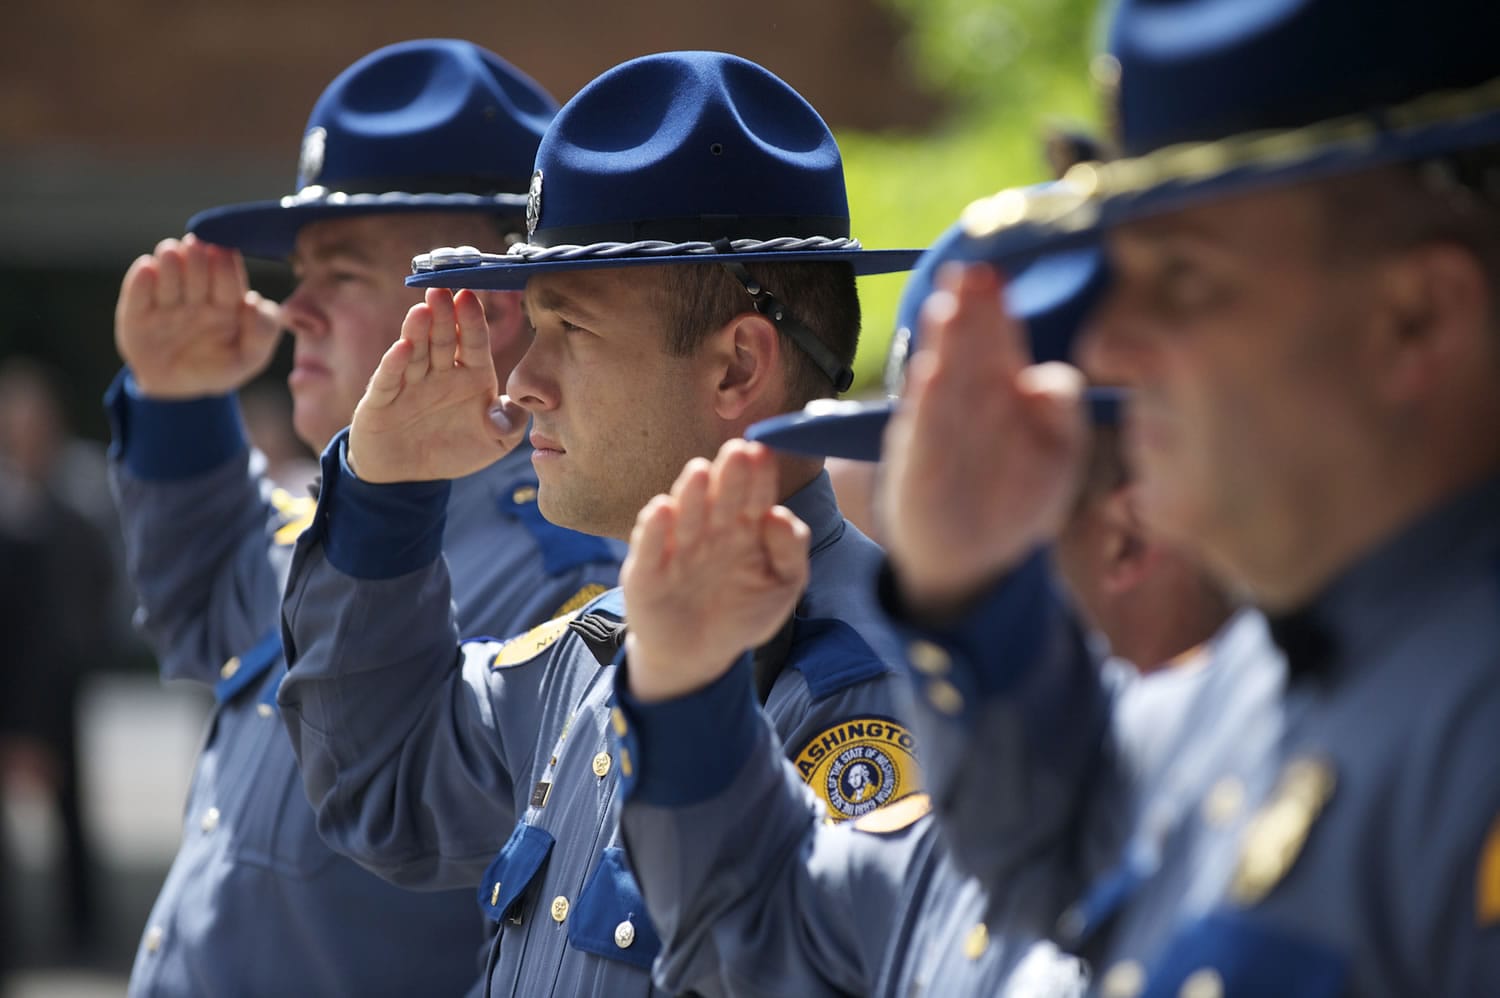 Washington State Patrol troopers salute during the national anthem.